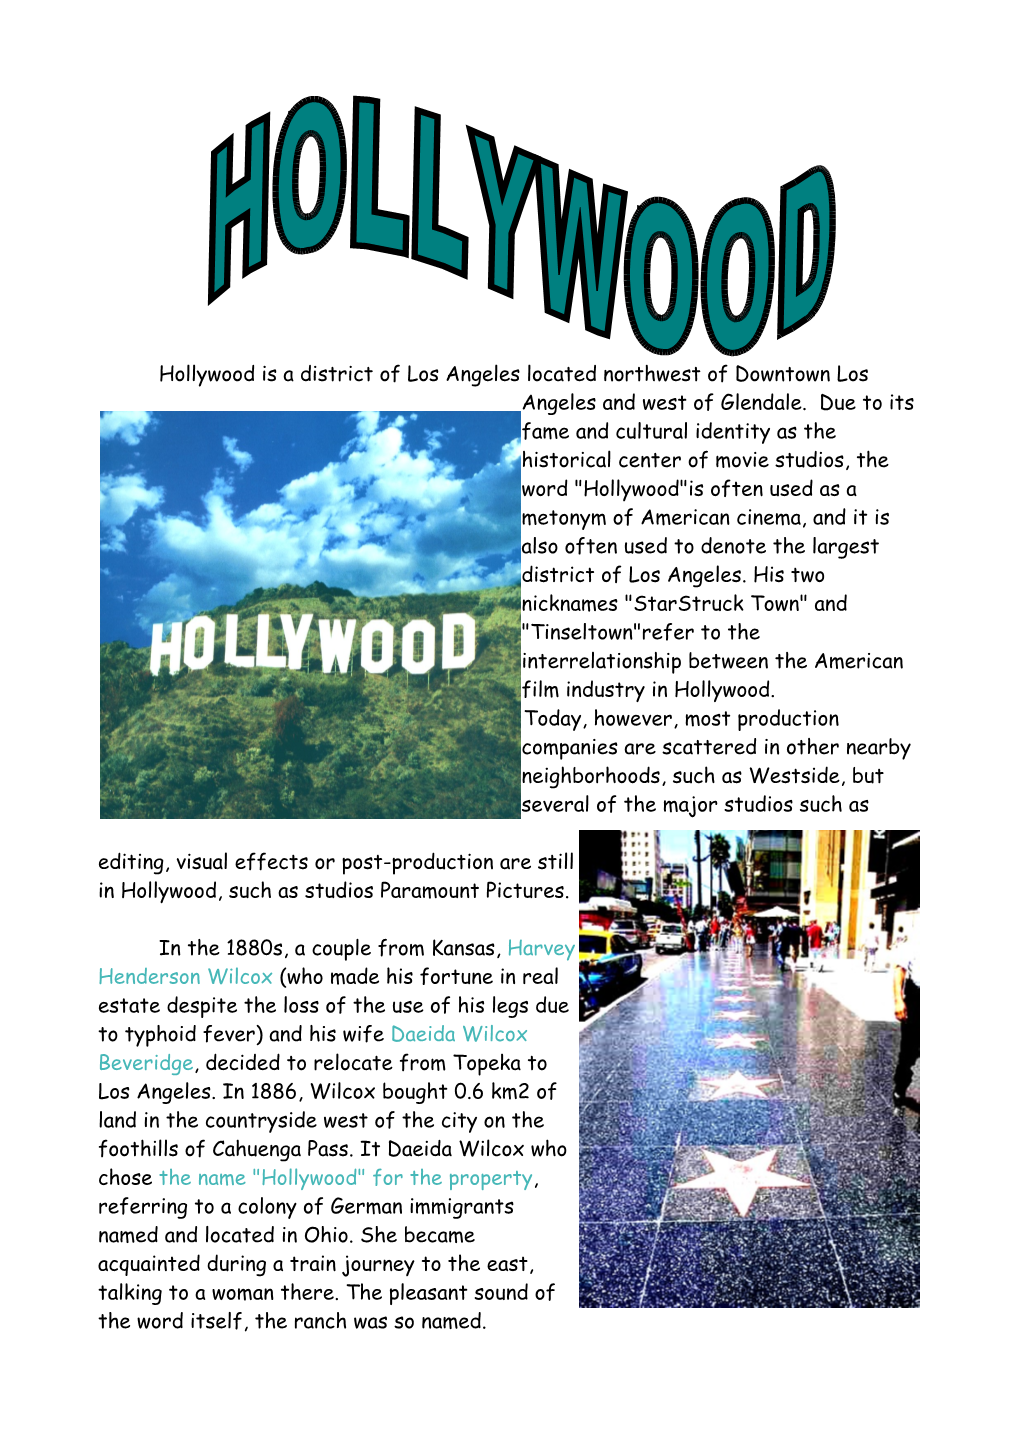 Hollywood Is a District of Los Angeles Located Northwest of Downtown Los Angeles and West of Glendale. Due to Its Fame and Cult